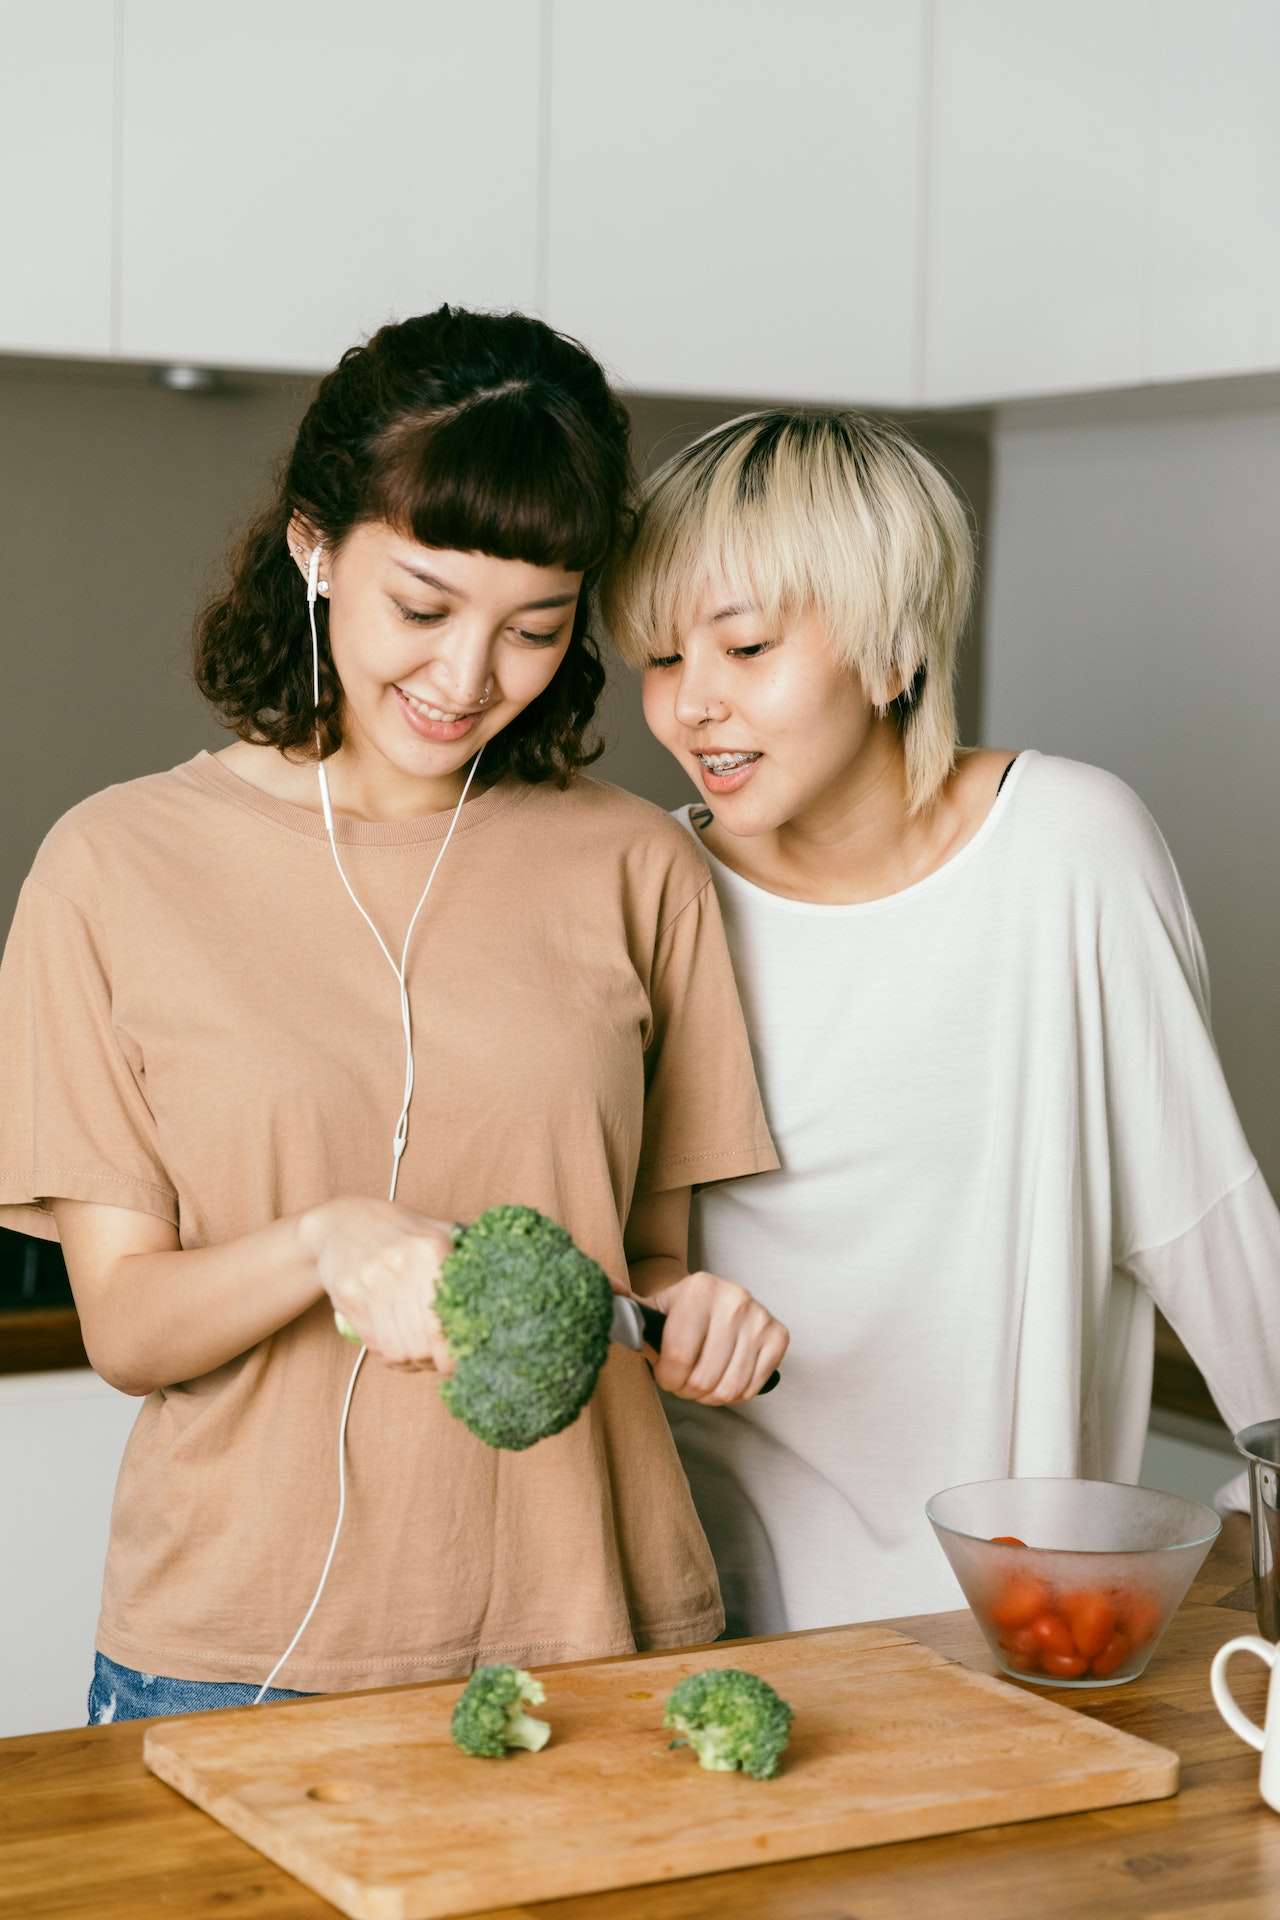 Woman Looking at her Friend Cutting Brocoli